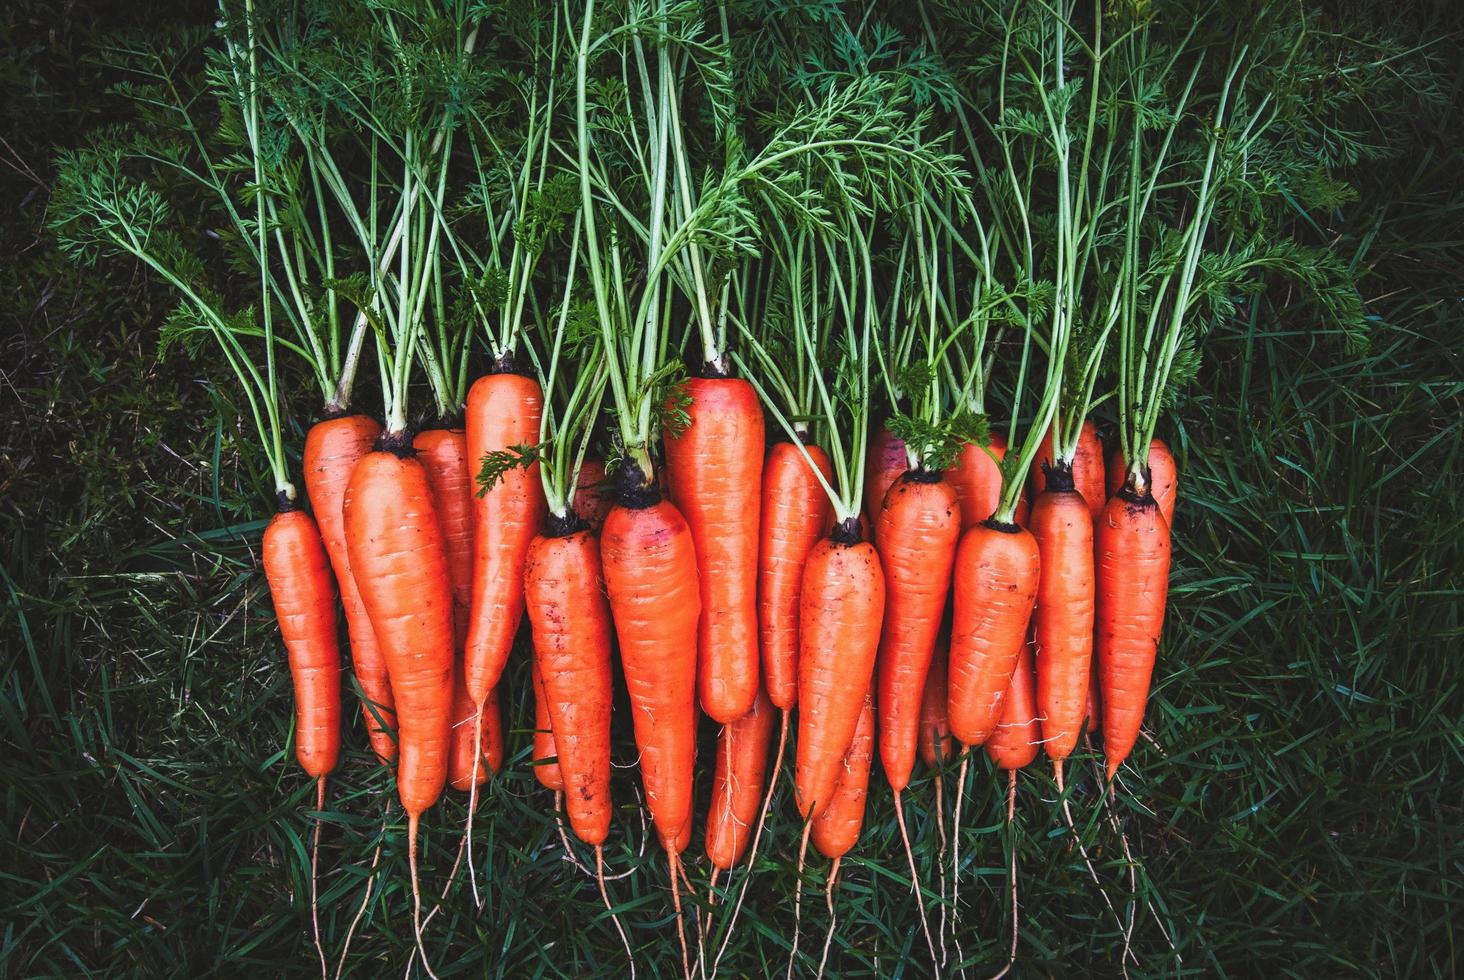 Carrots on grass in vegetable garden, harvested carrots in a row photo